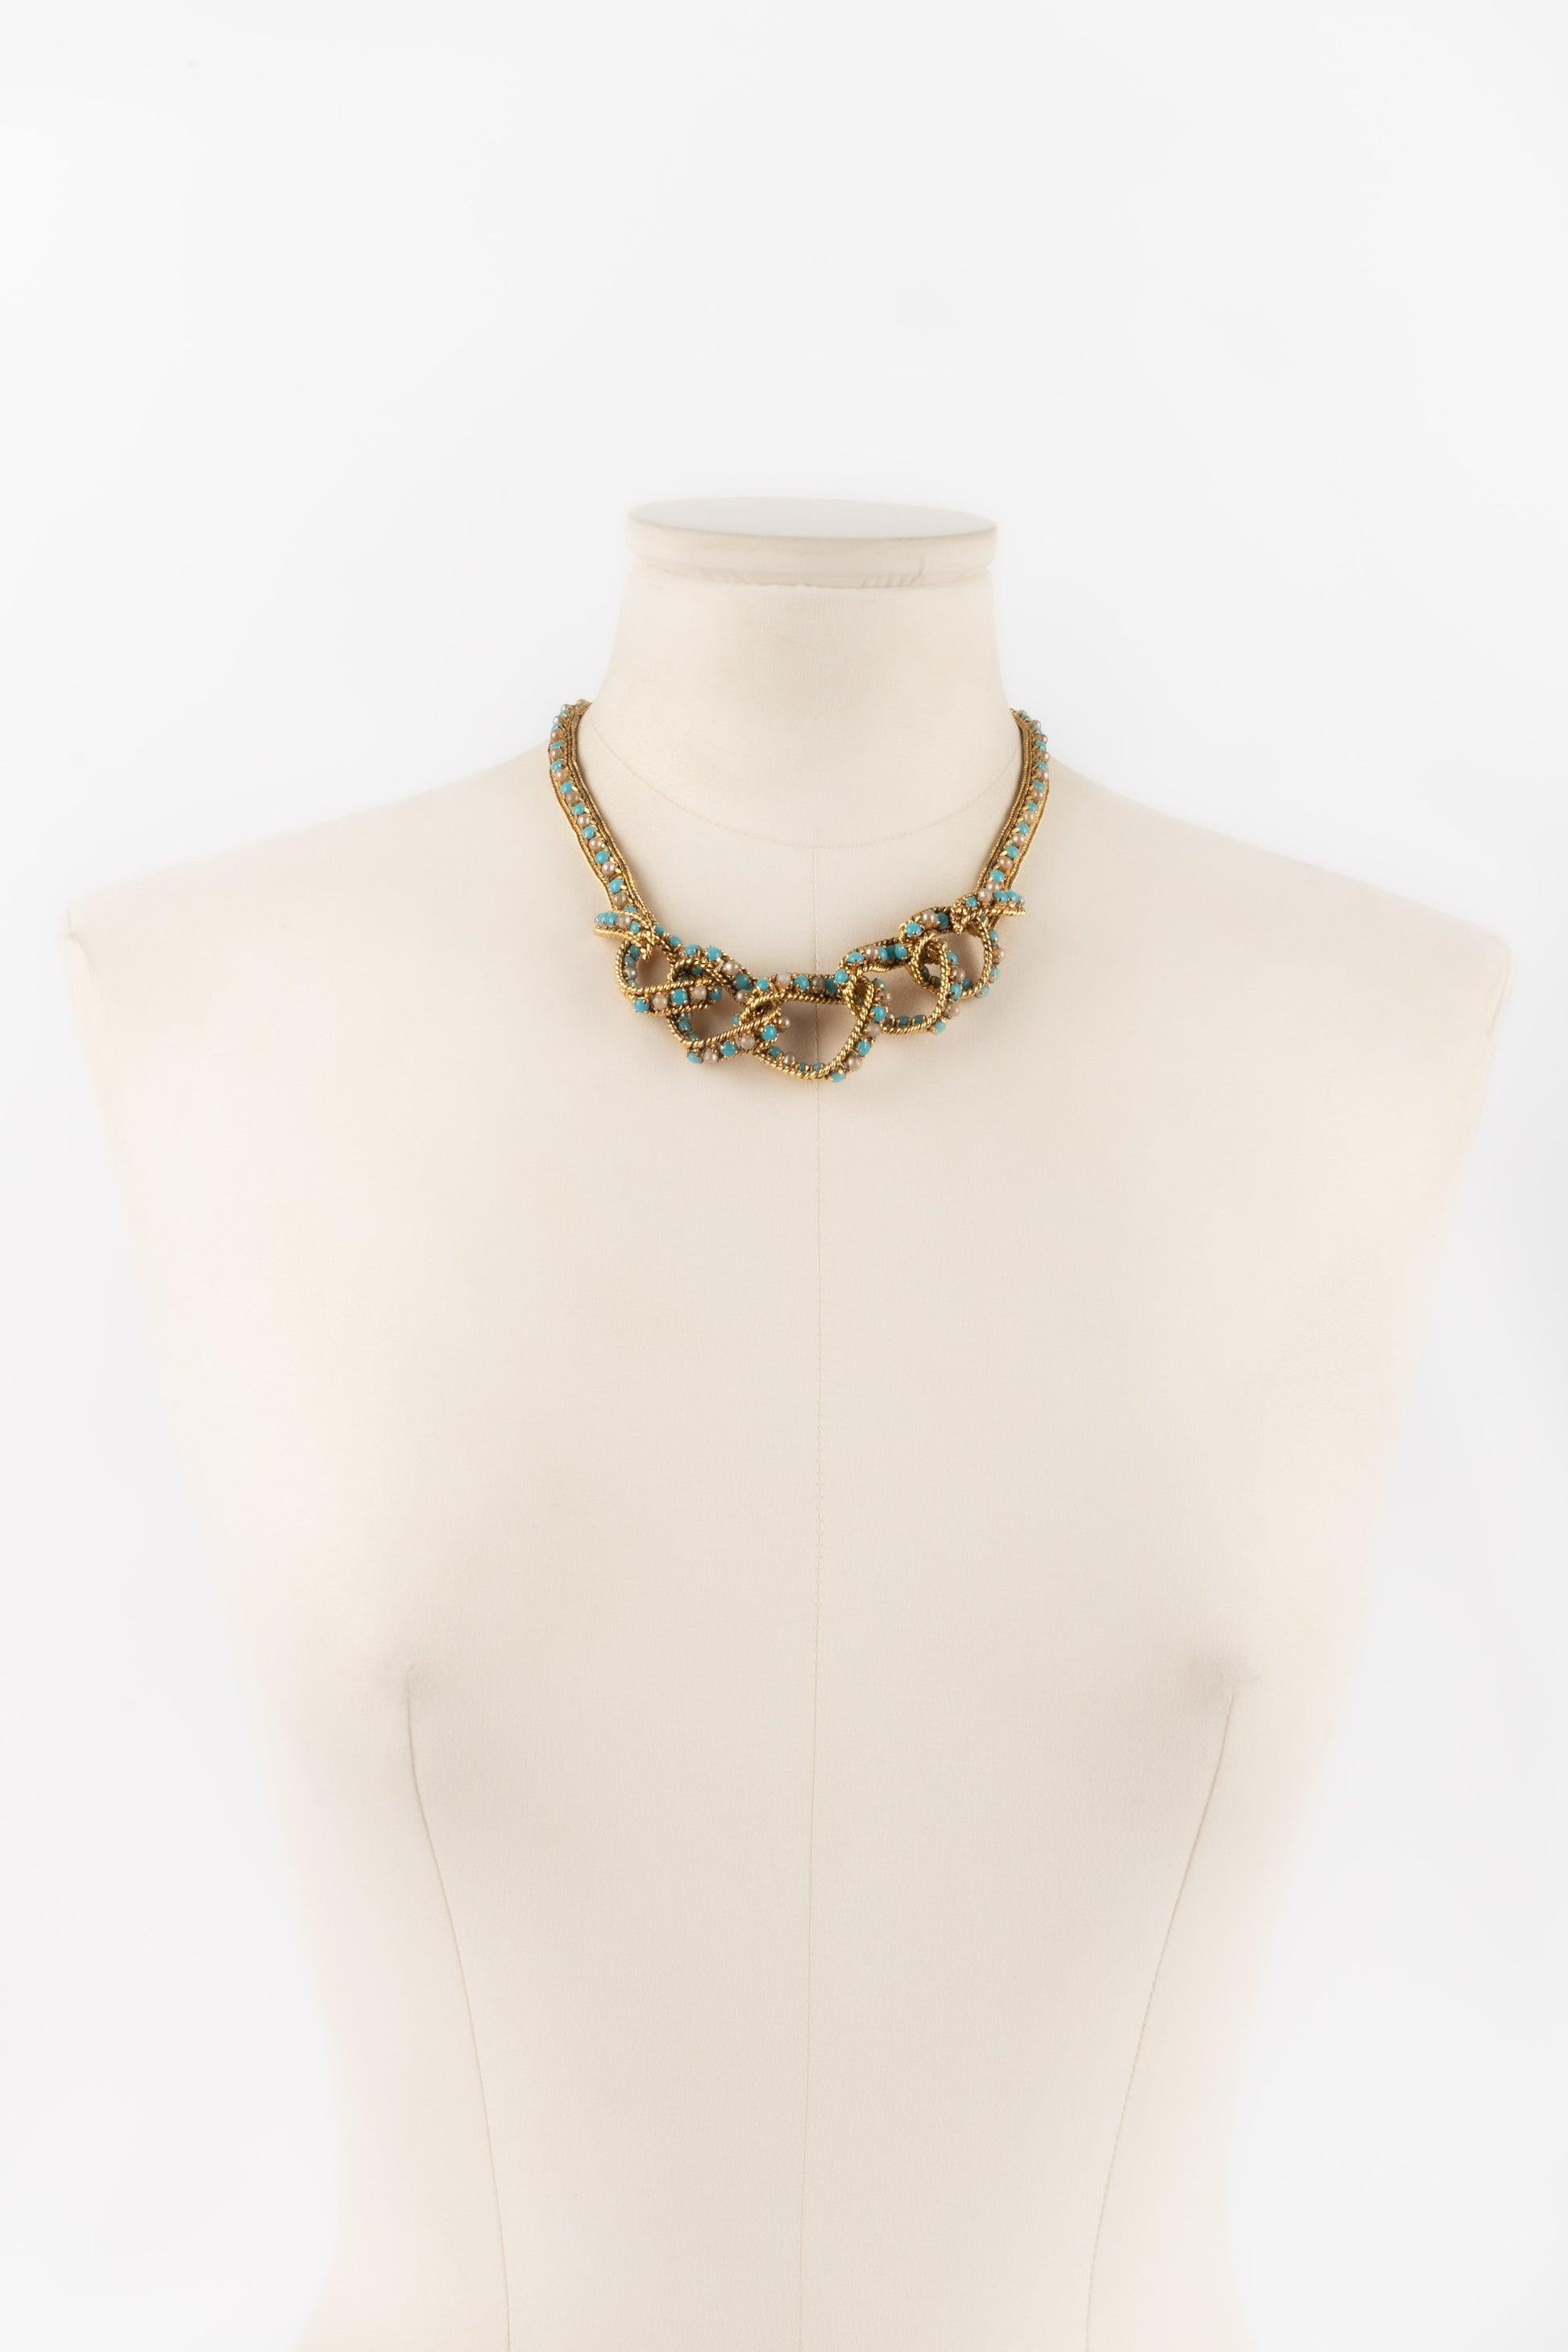 Dior Golden Metal Necklace with Costume Pearly Cabochons, 1965 For Sale 4